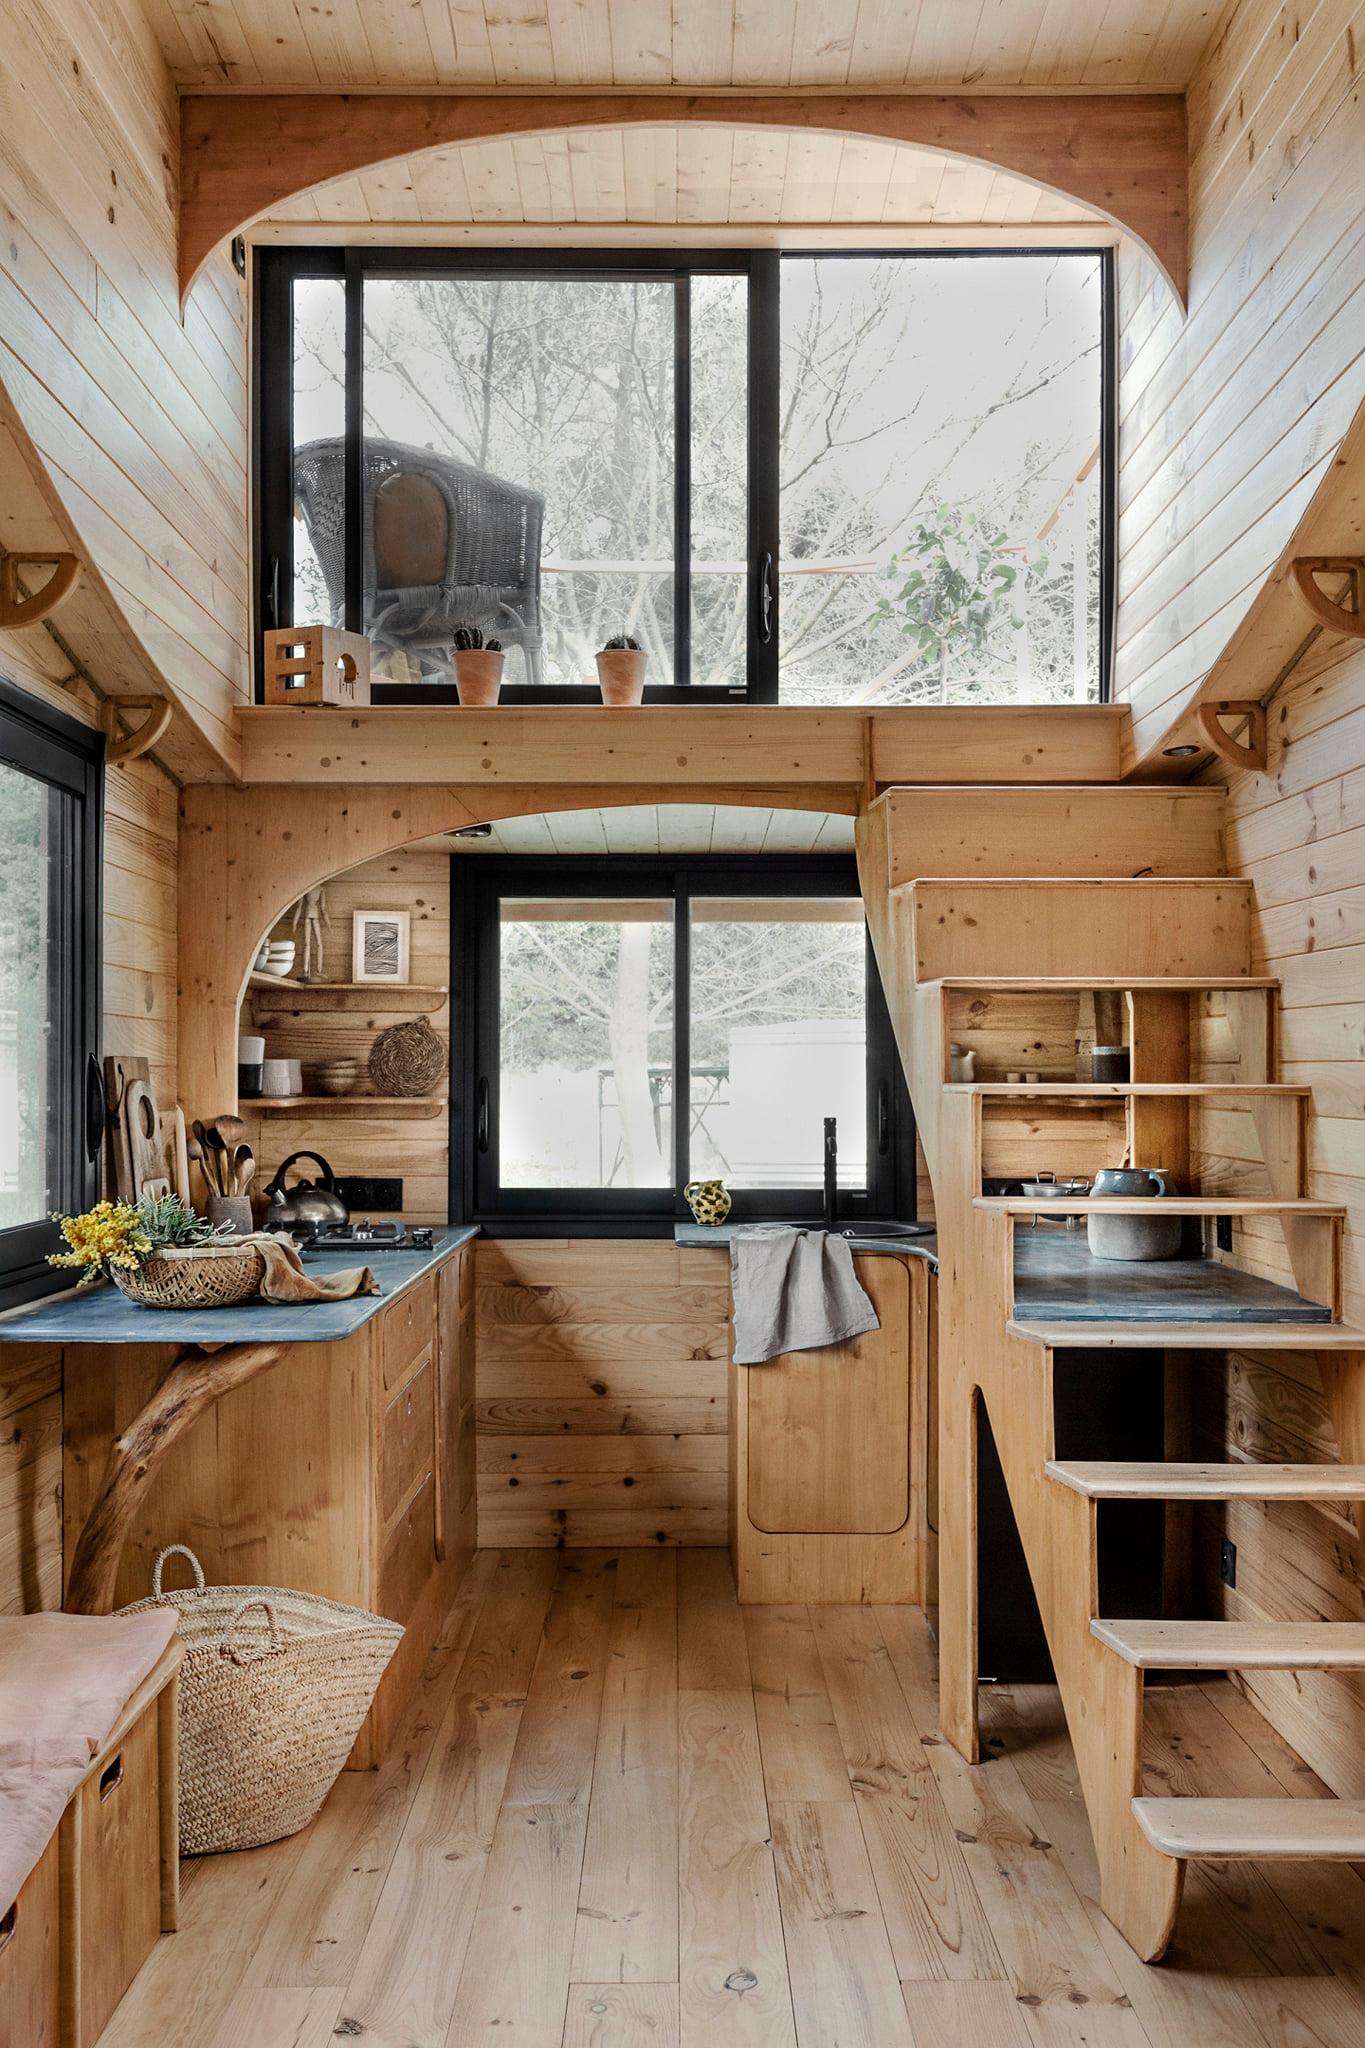 Kitchen & Stairs to Balcony - P'tit Nid Mobile Tiny House